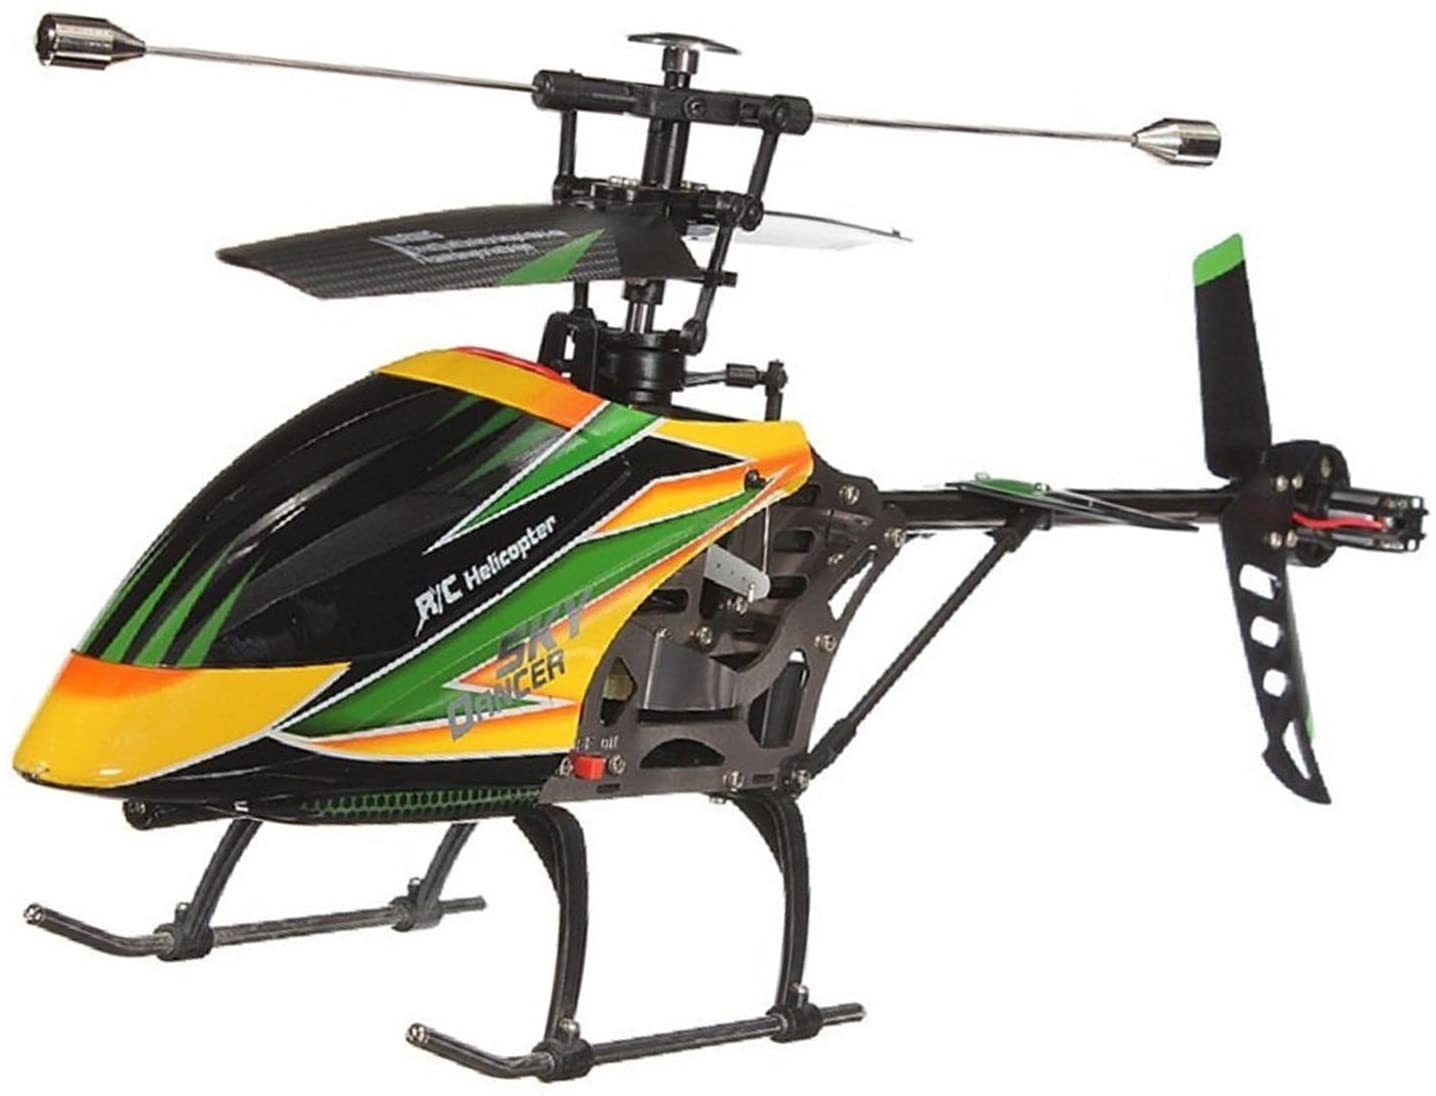 NiGHT LiONS TECH® Remote Control RC Helicopter